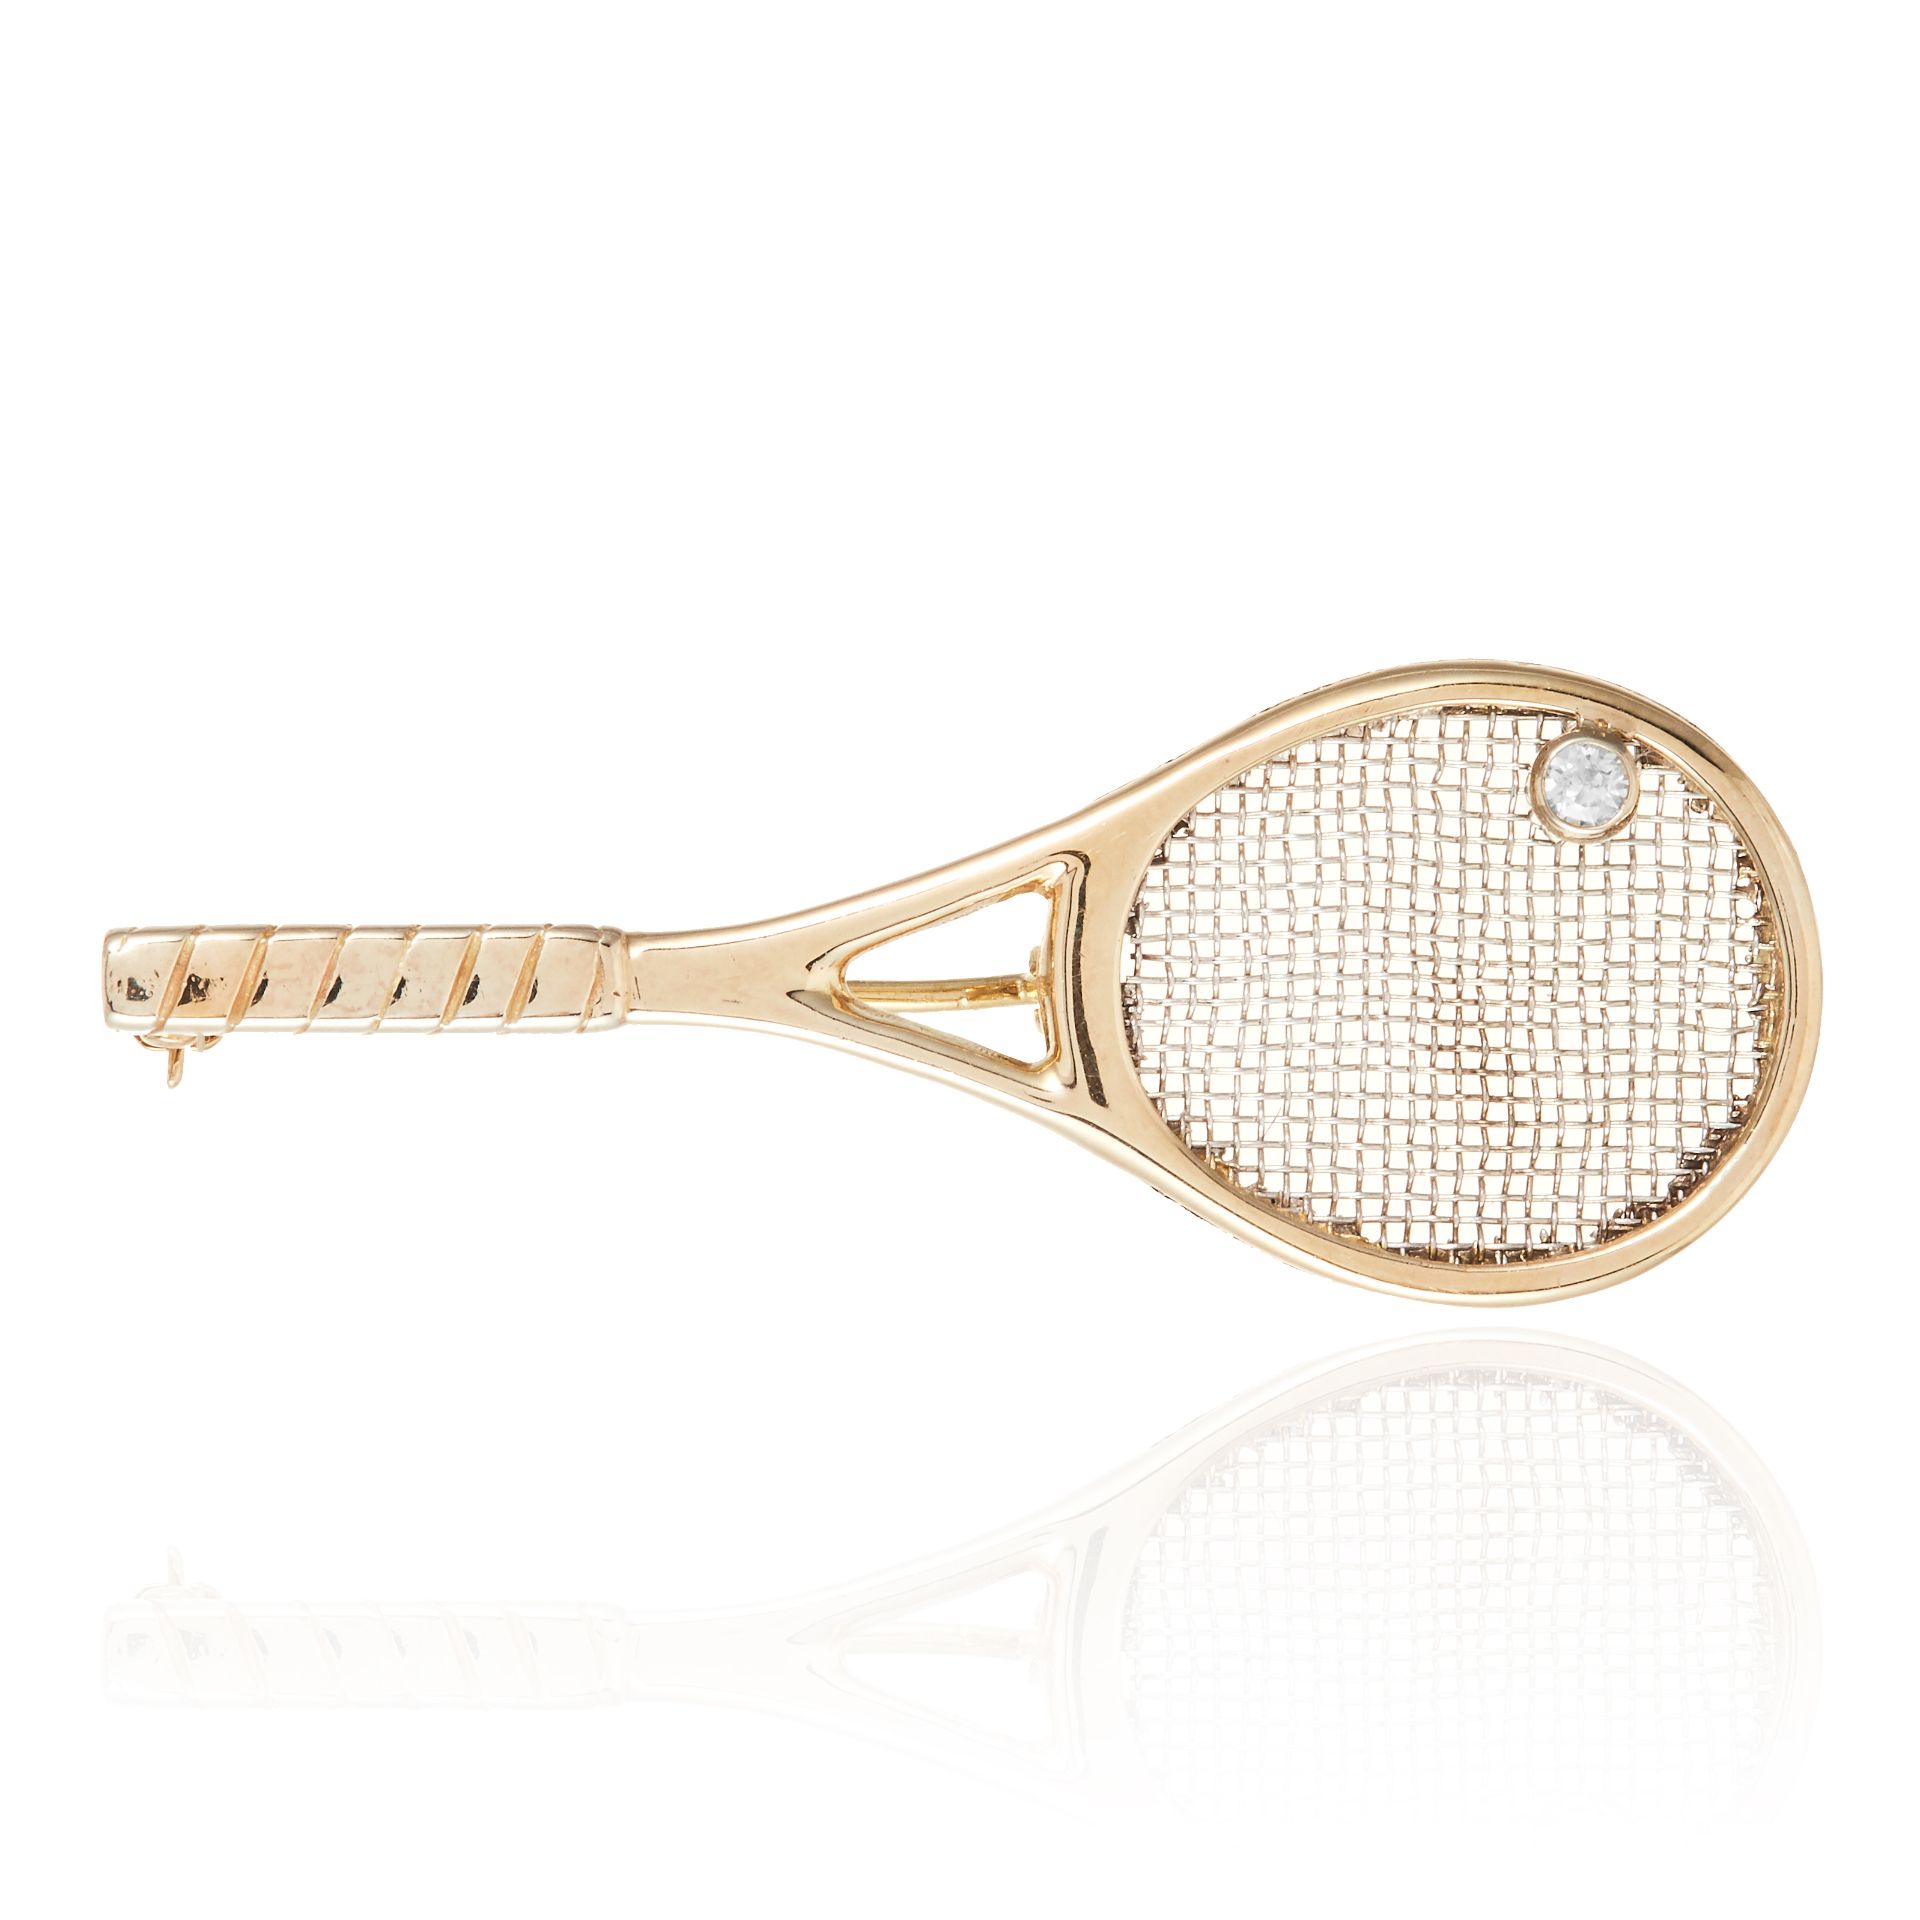 A DIAMOND NOVELTY TENNIS BROOCH in 9ct yellow gold, designed as a tennis batt, jewelled with a round